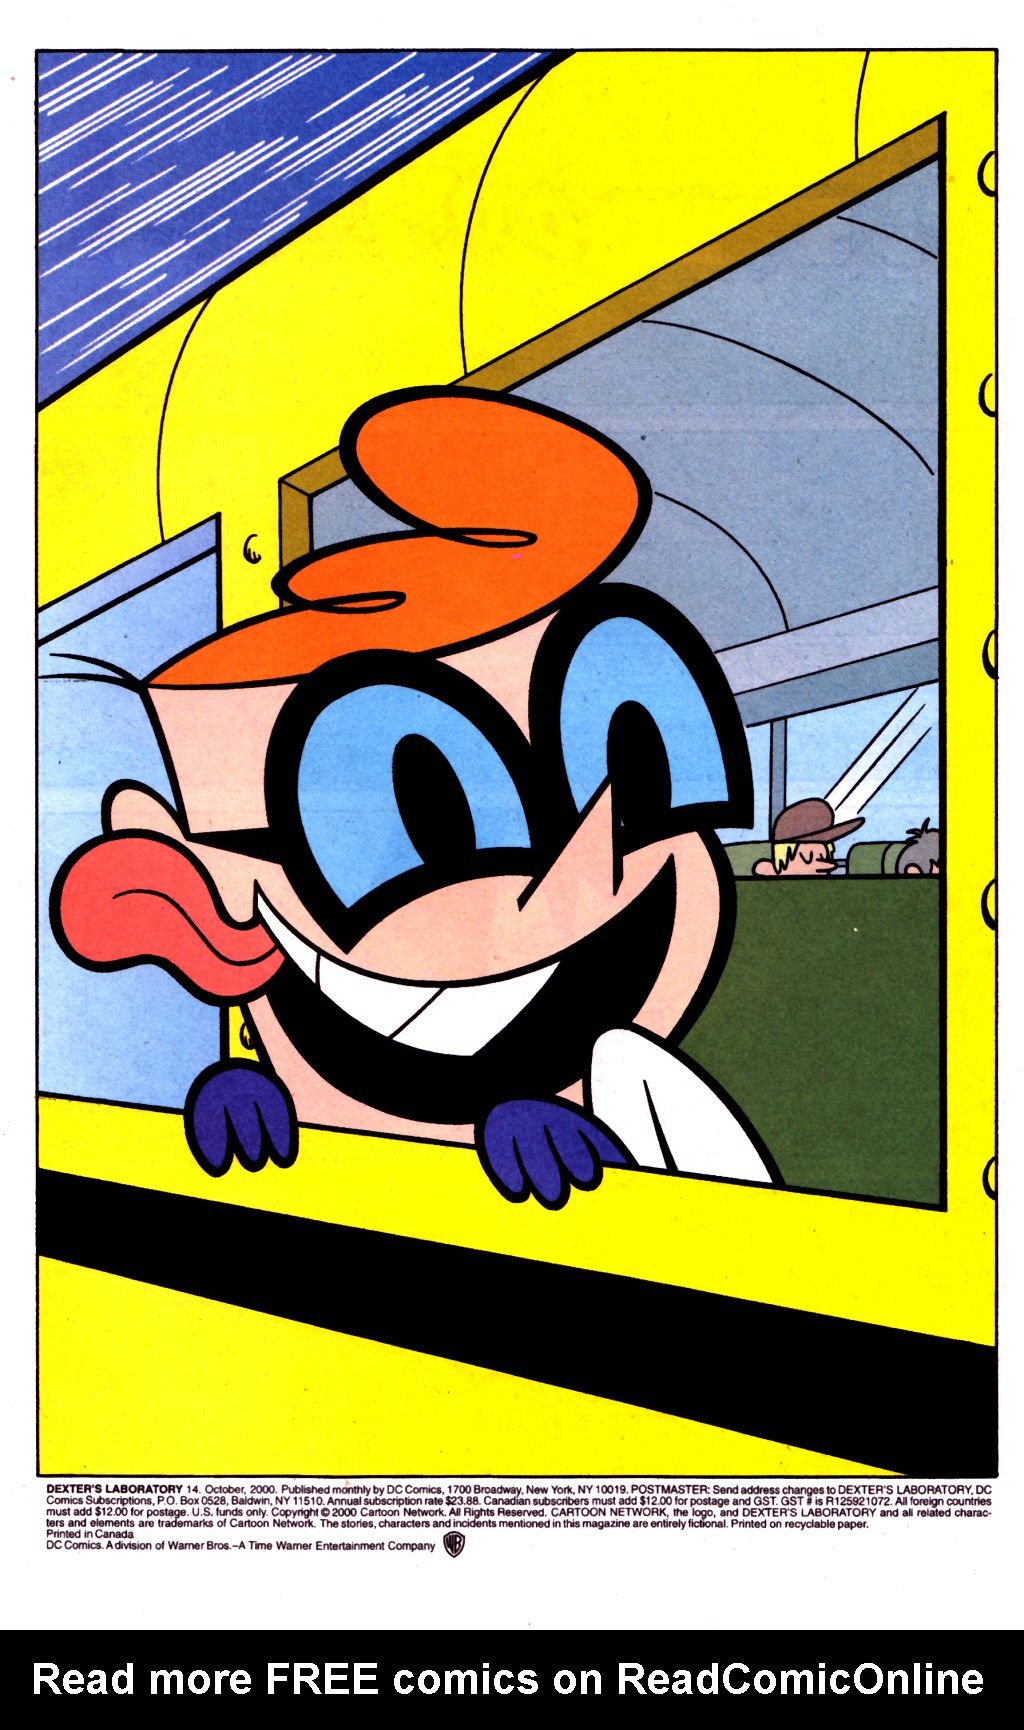 Dexter S Laboratory Issue 14 | Read Dexter S Laboratory Issue 14 comic  online in high quality. Read Full Comic online for free - Read comics  online in high quality .| READ COMIC ONLINE